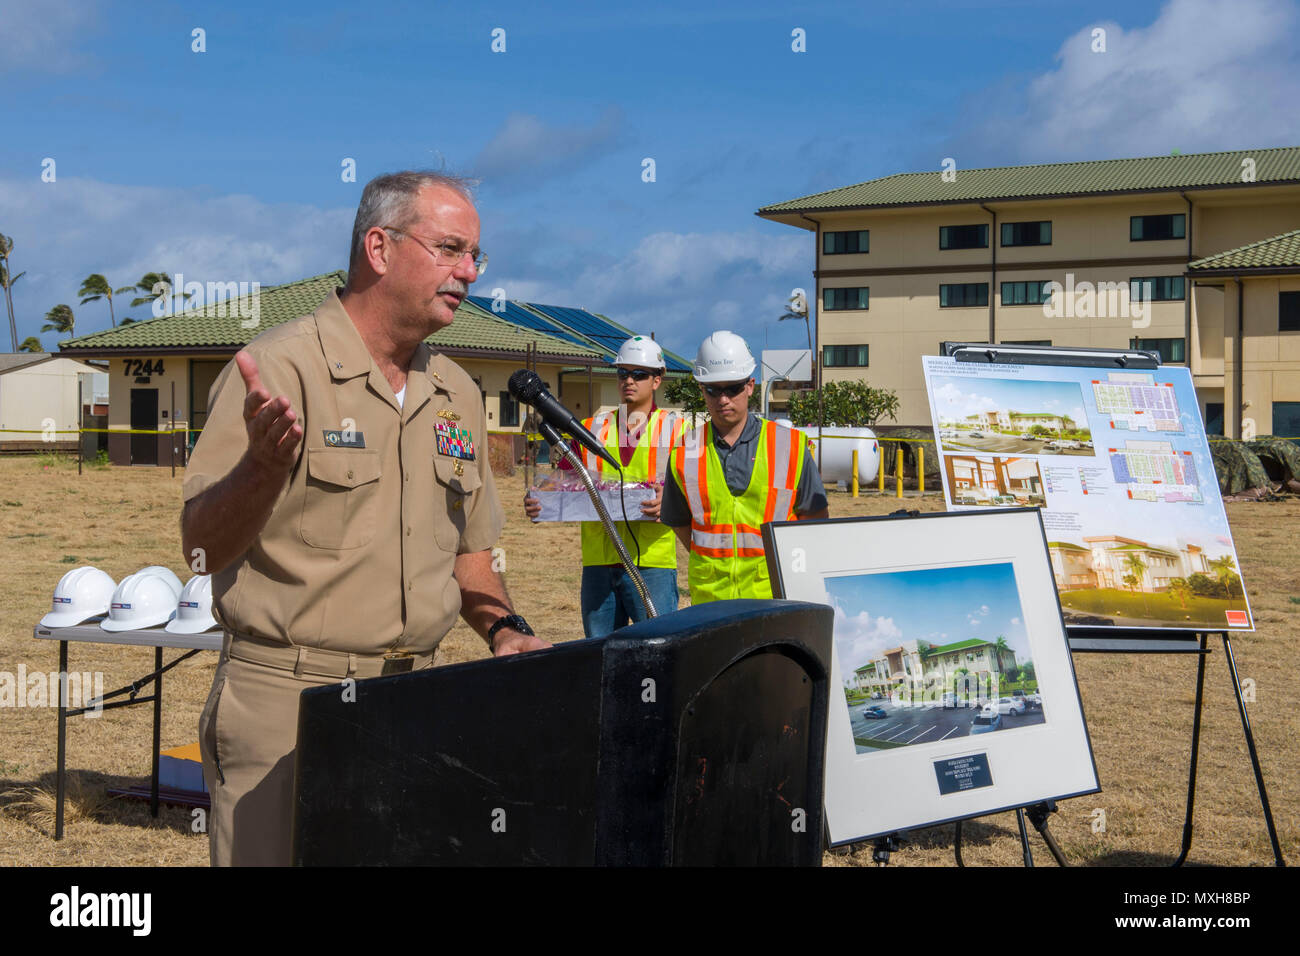 161108-N-YW024-022 KANEOHE BAY, Hawaii (Nov. 8, 2016)  Rear Adm. Bruce Gillingham, commander, Navy Medicine West, San Diego, delivers opening remarks during a groundbreaking ceremony for Naval Medical and Dental Replacement Clinic at Marine Corps Base Hawaii (MCBH). The new medical and dental clinic will provide Navy Medicine and Marine Forces Medical personnel with state-of-the-art working spaces to keep the Navy and Marine Corps operational forces ready, healthy and on the job. (U.S. Navy photo by Petty Officer 2nd Class Katarzyna Kobiljak) Stock Photo